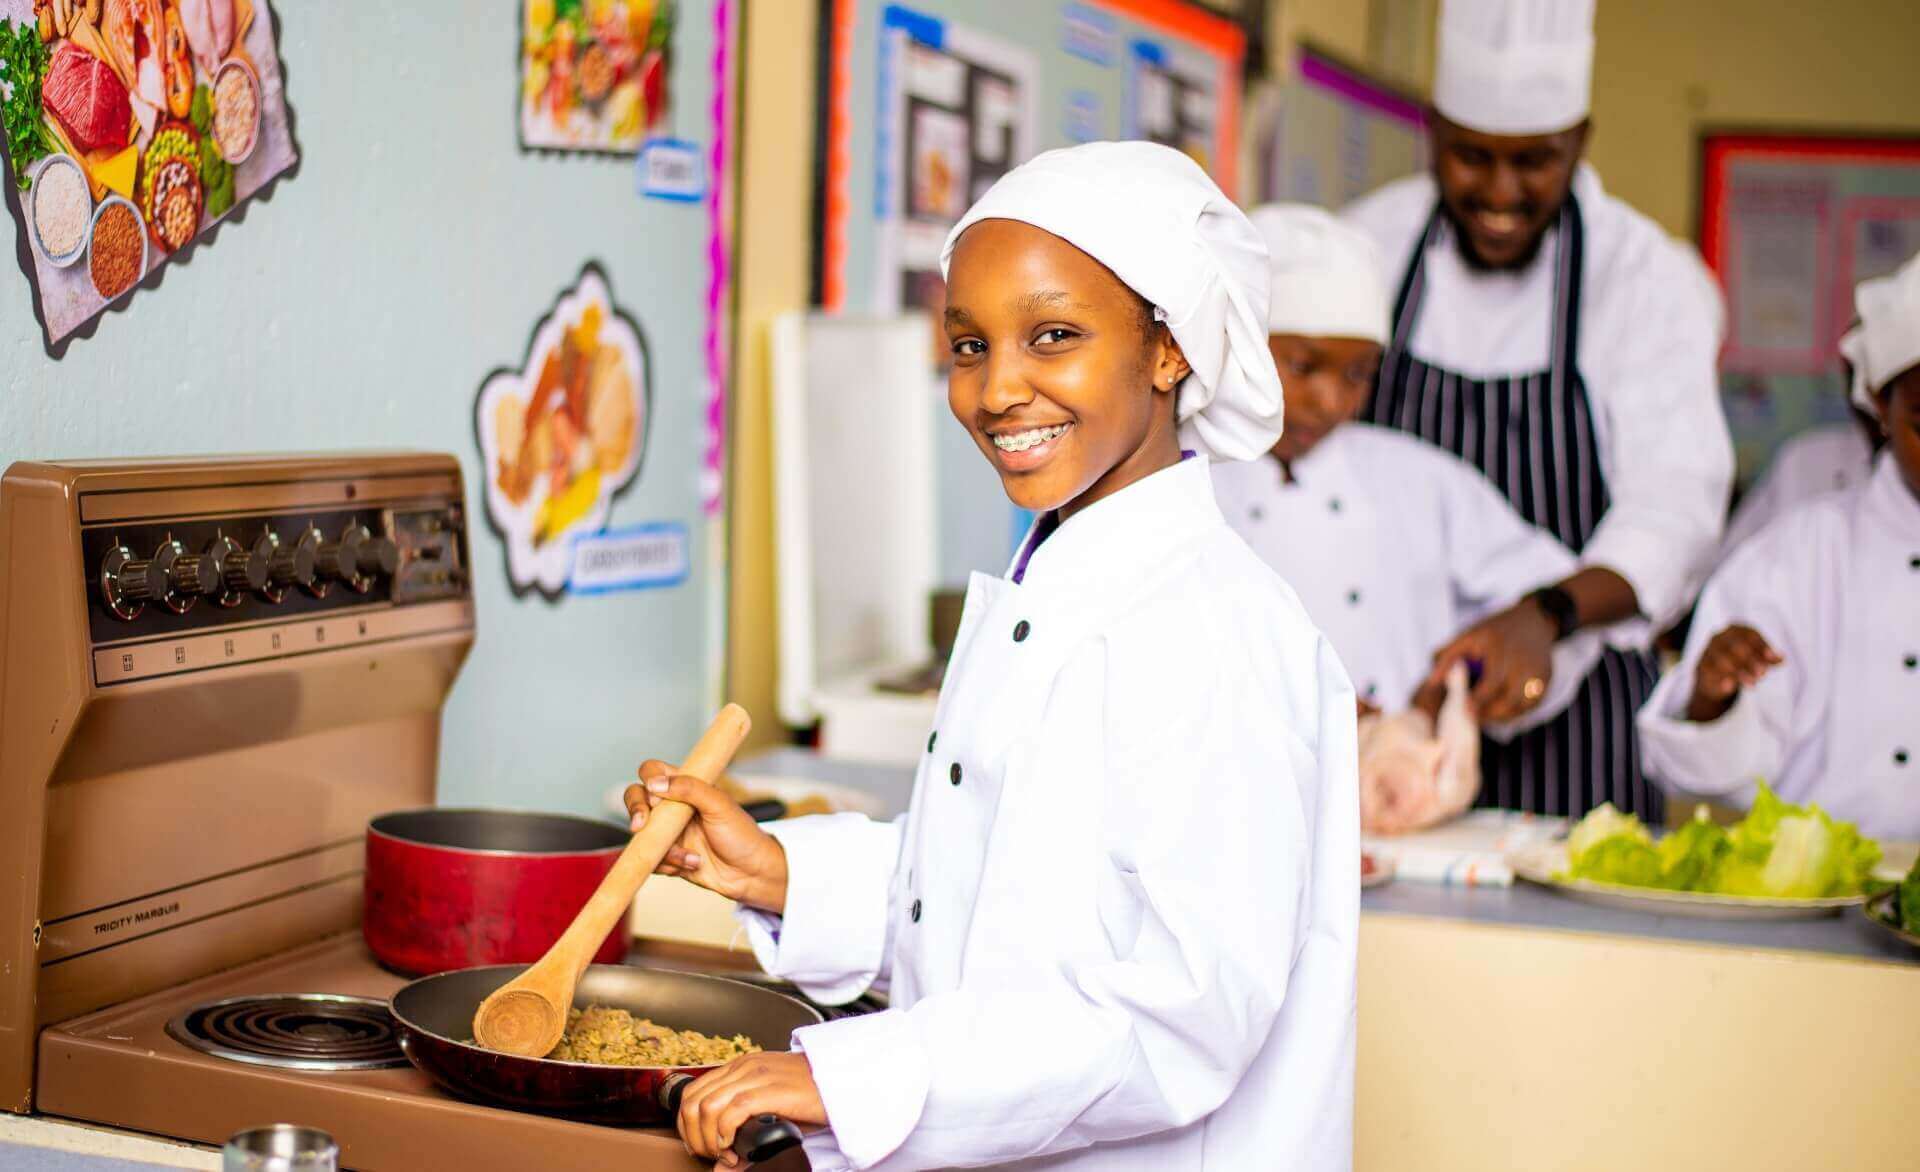 Riara springs junior high school students preparing food in kitchen under supervision of a chef